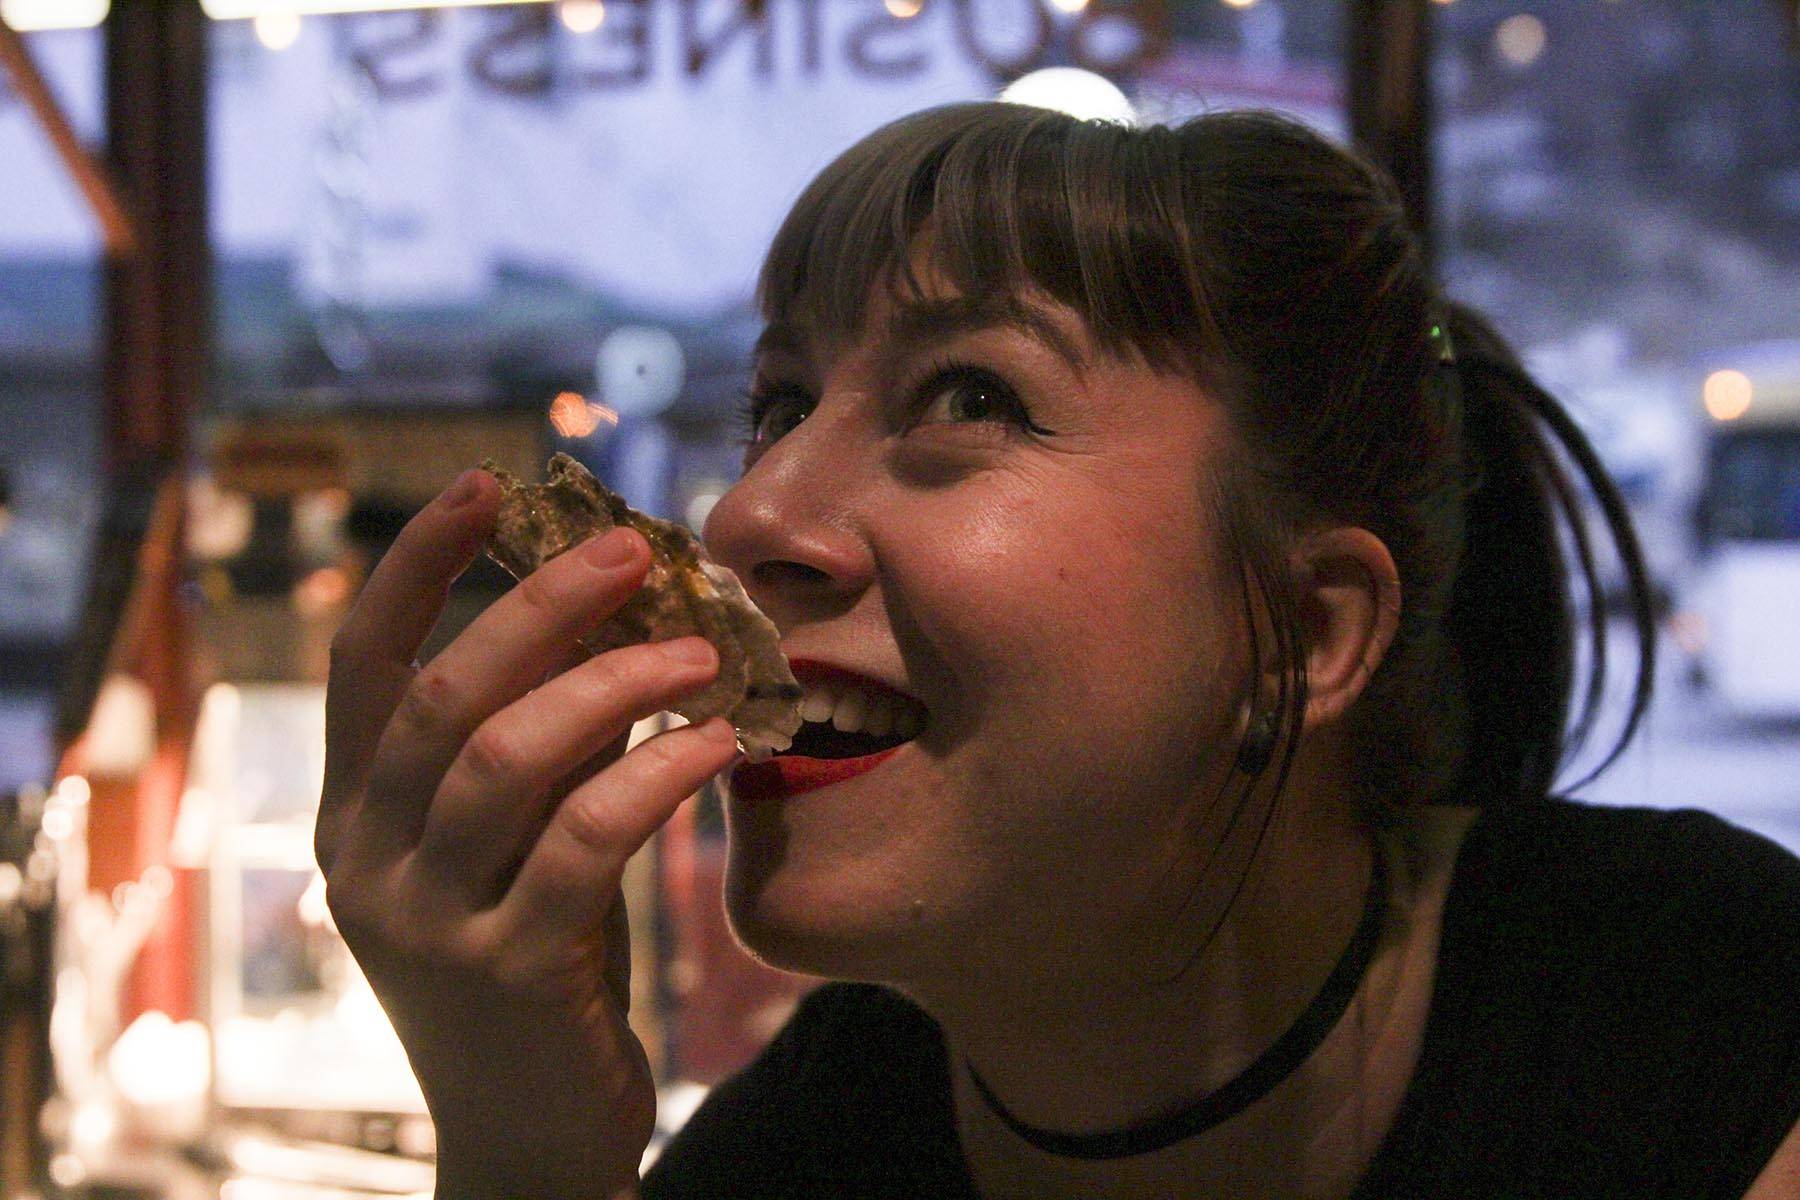 Bonilyn Parker shoots an oyster at the Triangle Club on First Friday.